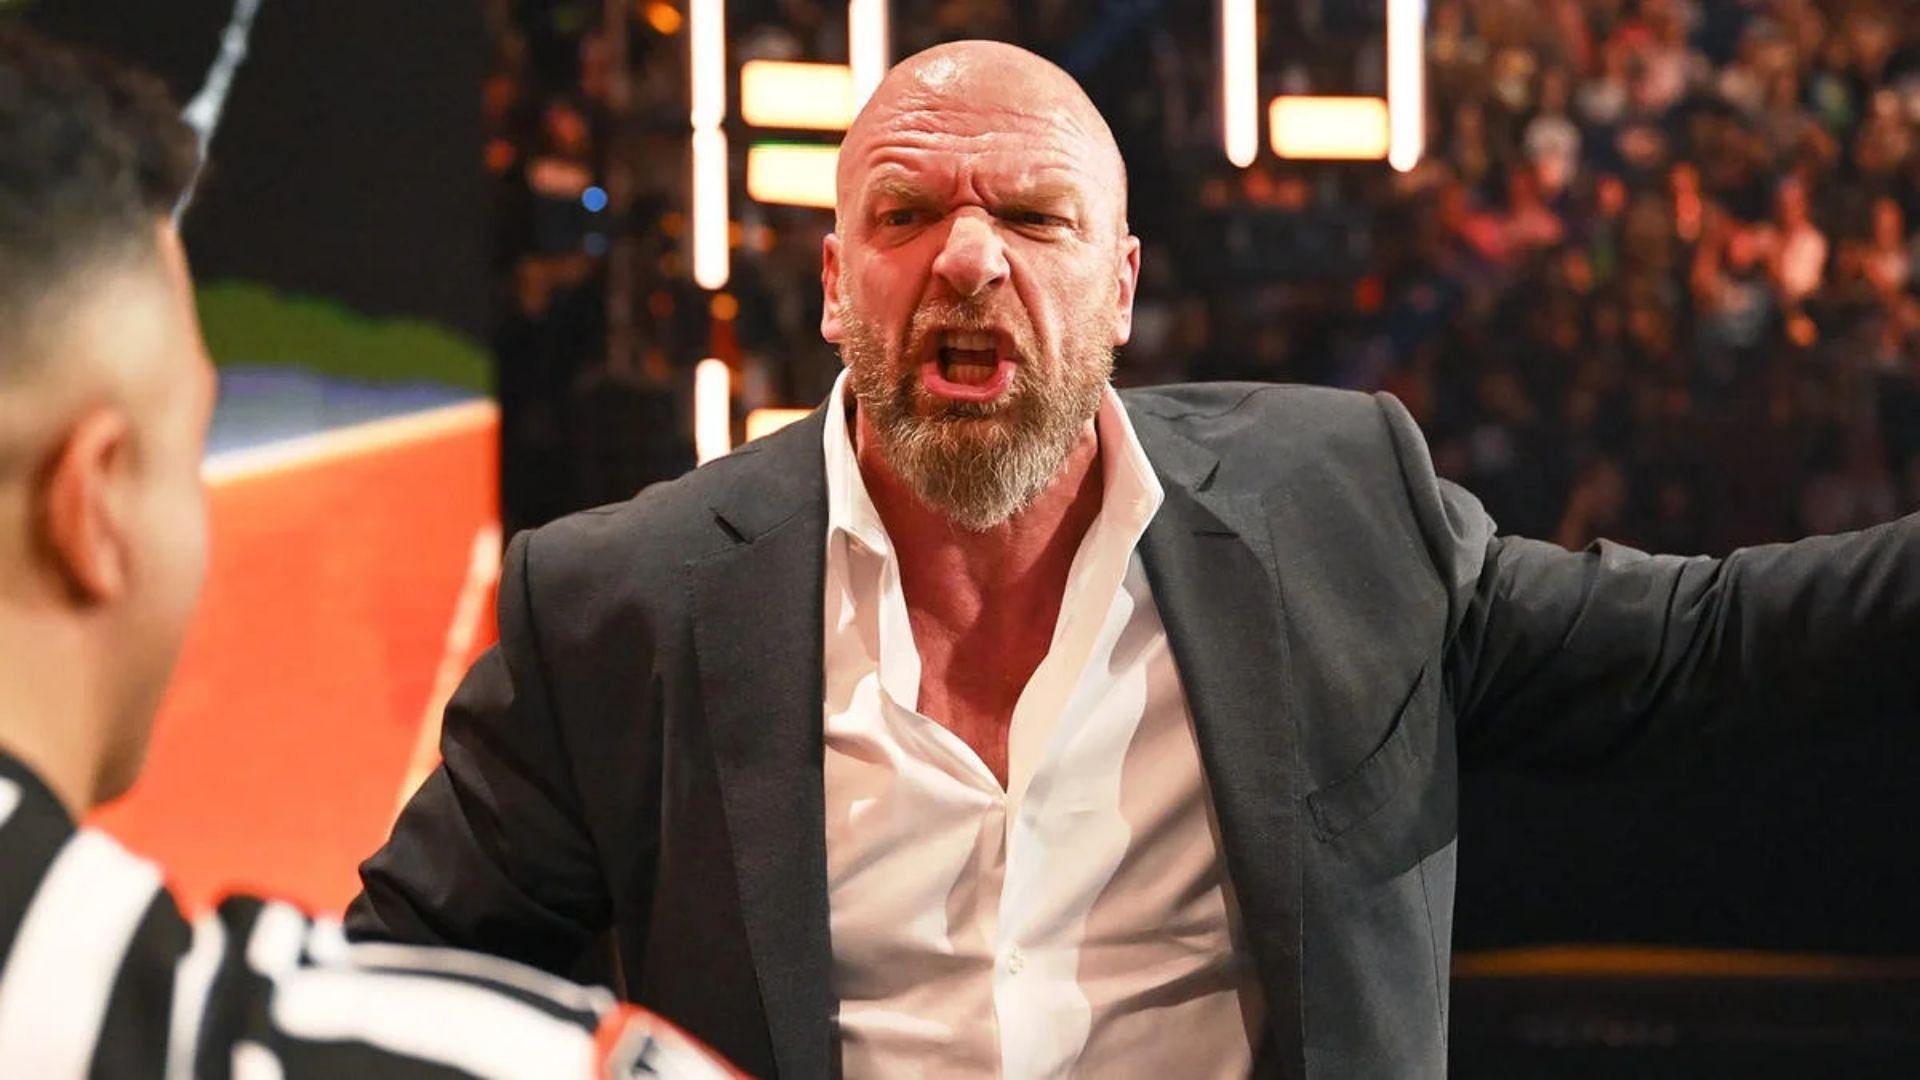 Triple H and former WWE Champion had unresolved issues